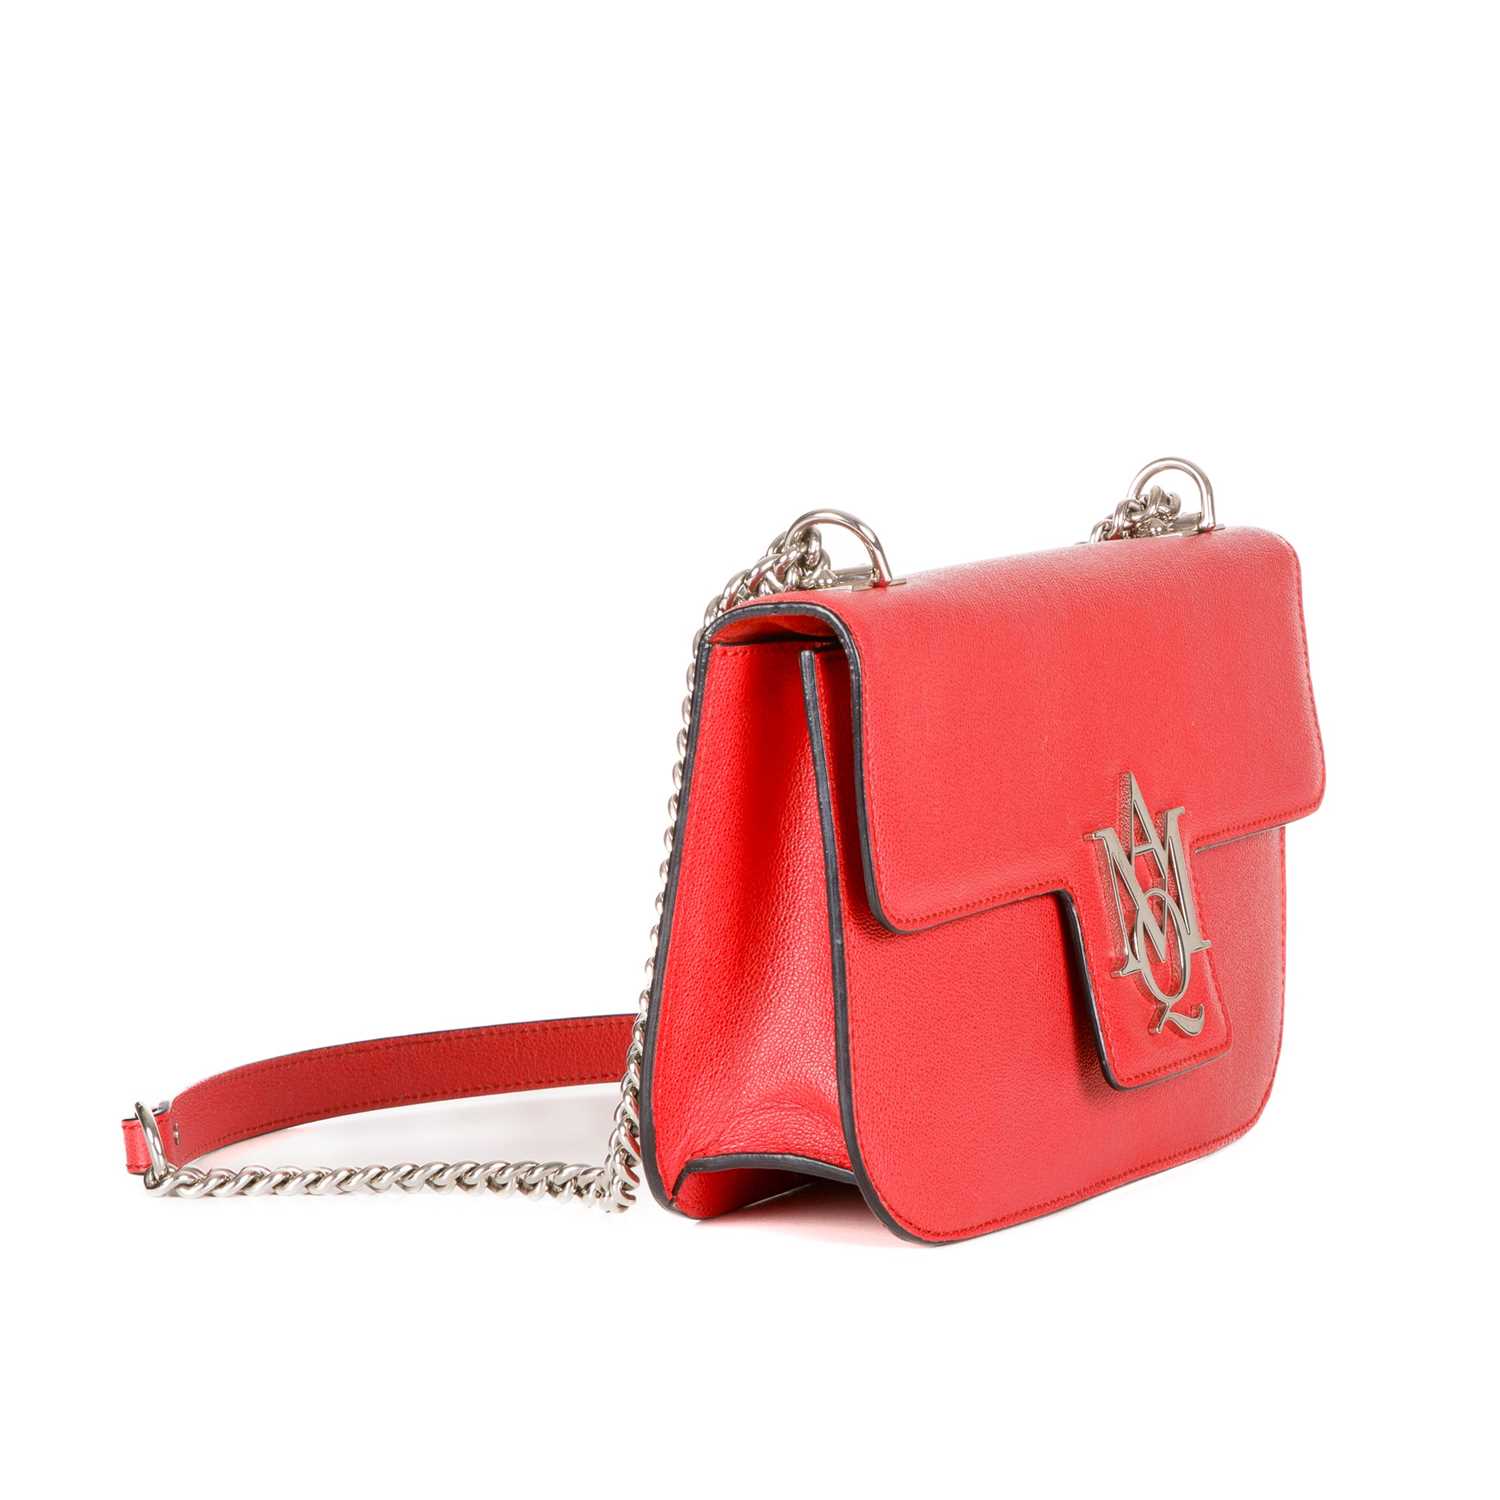 Alexander McQueen, an AMQ Insignia Chain handbag, crafted from red calfskin leather, with polished - Image 4 of 5